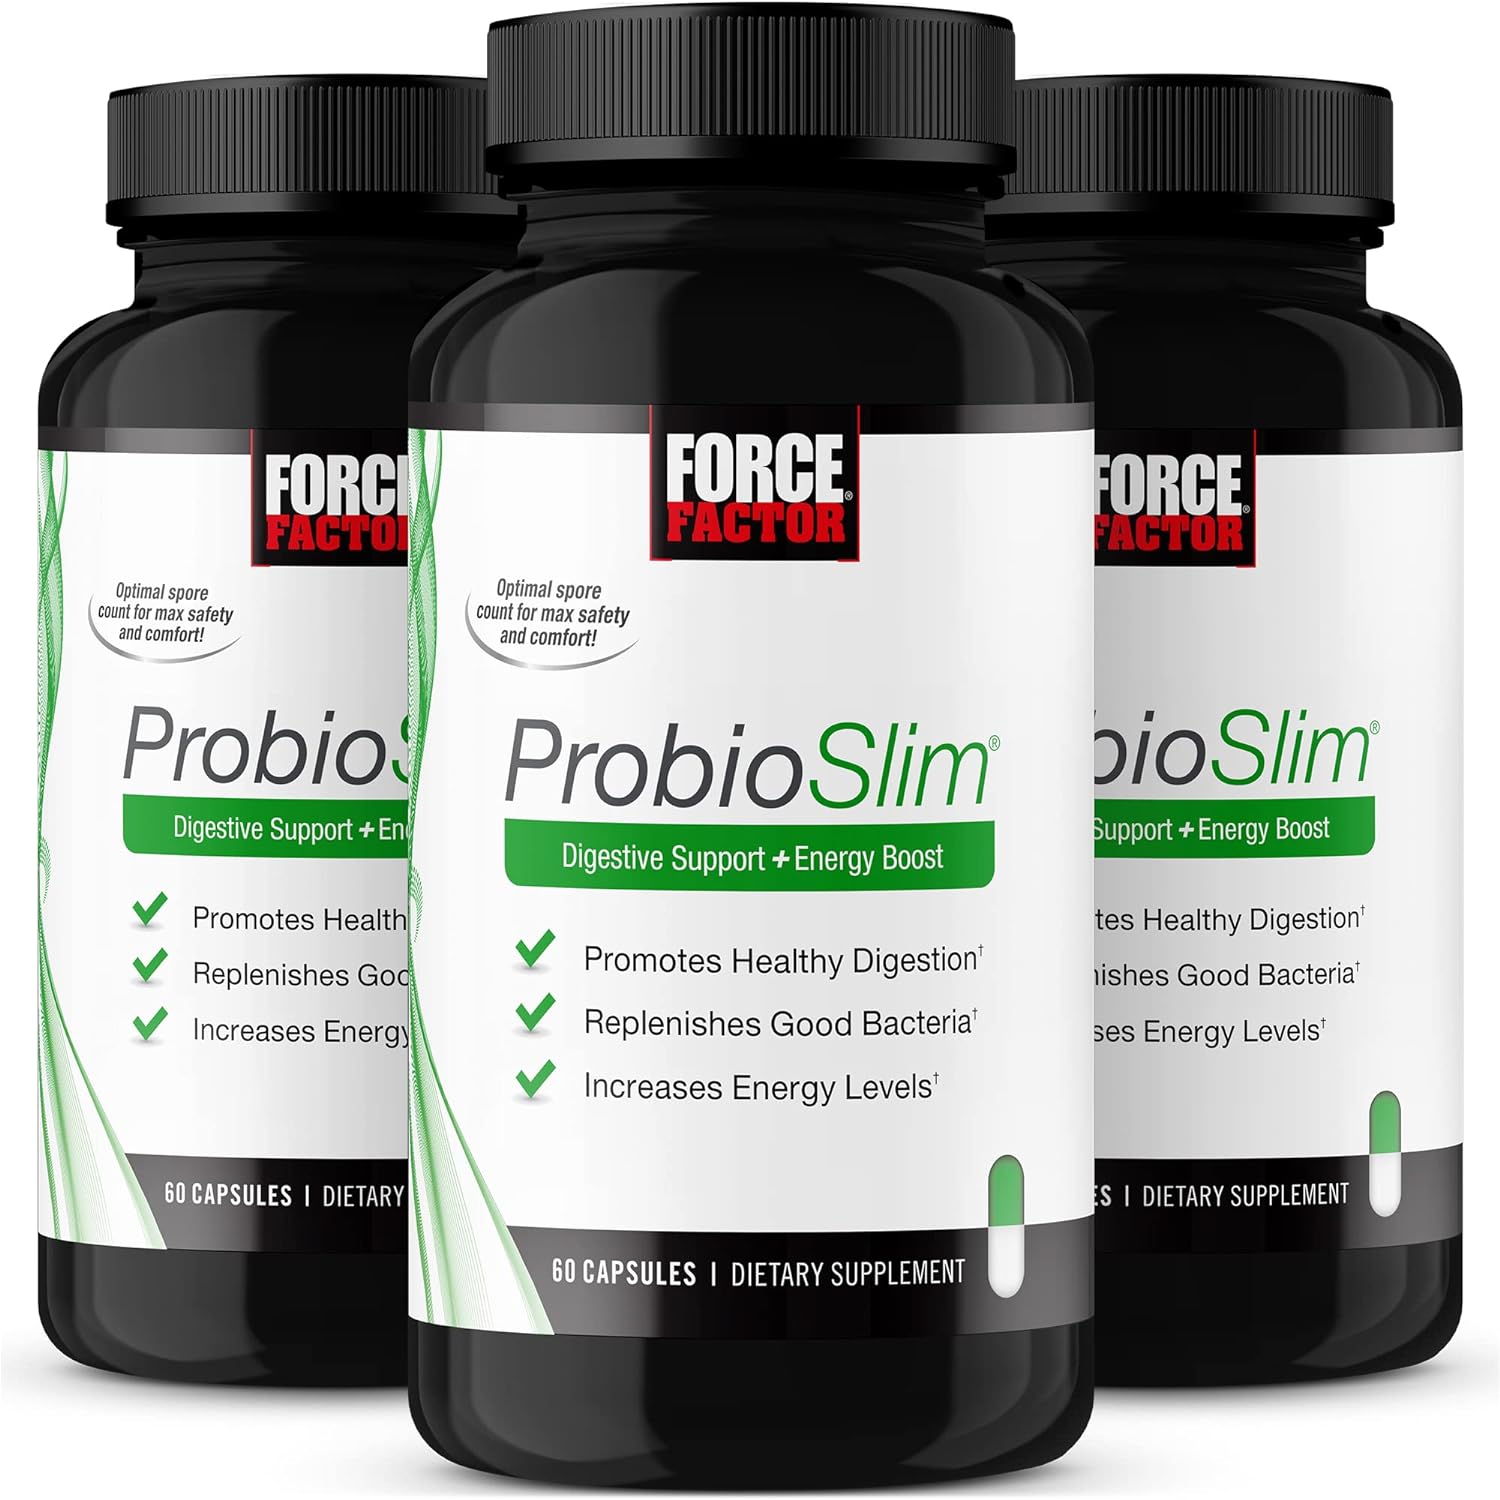 Force Factor ProbioSlim Probiotic Supplement for Women and Men with Probiotics and Green Tea Extract, Reduce Gas, Bloating, Constipation, Support Digestive Health & Gut Health, 180 Capsules (3-Pack)